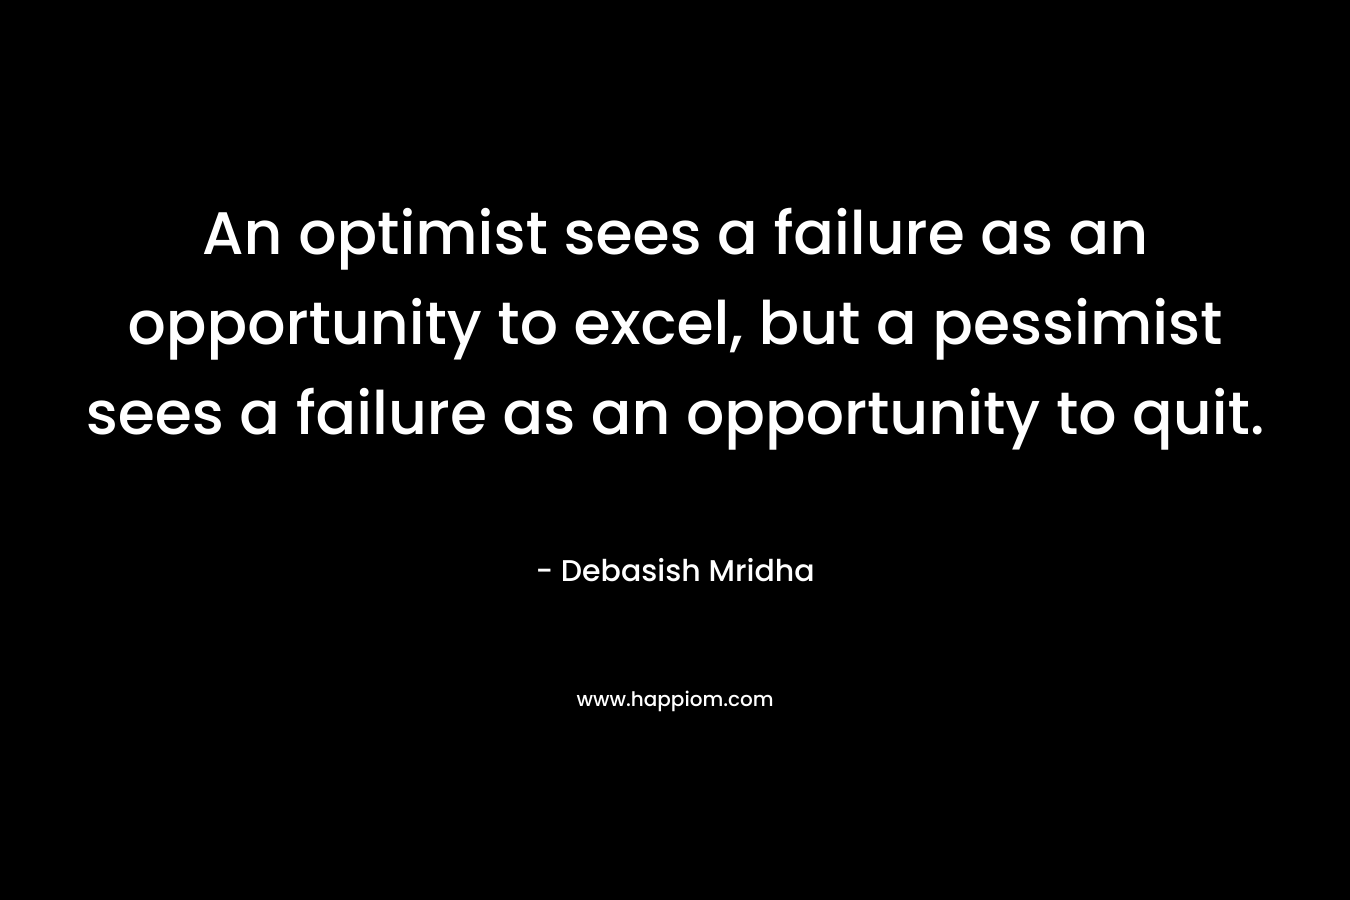 An optimist sees a failure as an opportunity to excel, but a pessimist sees a failure as an opportunity to quit.